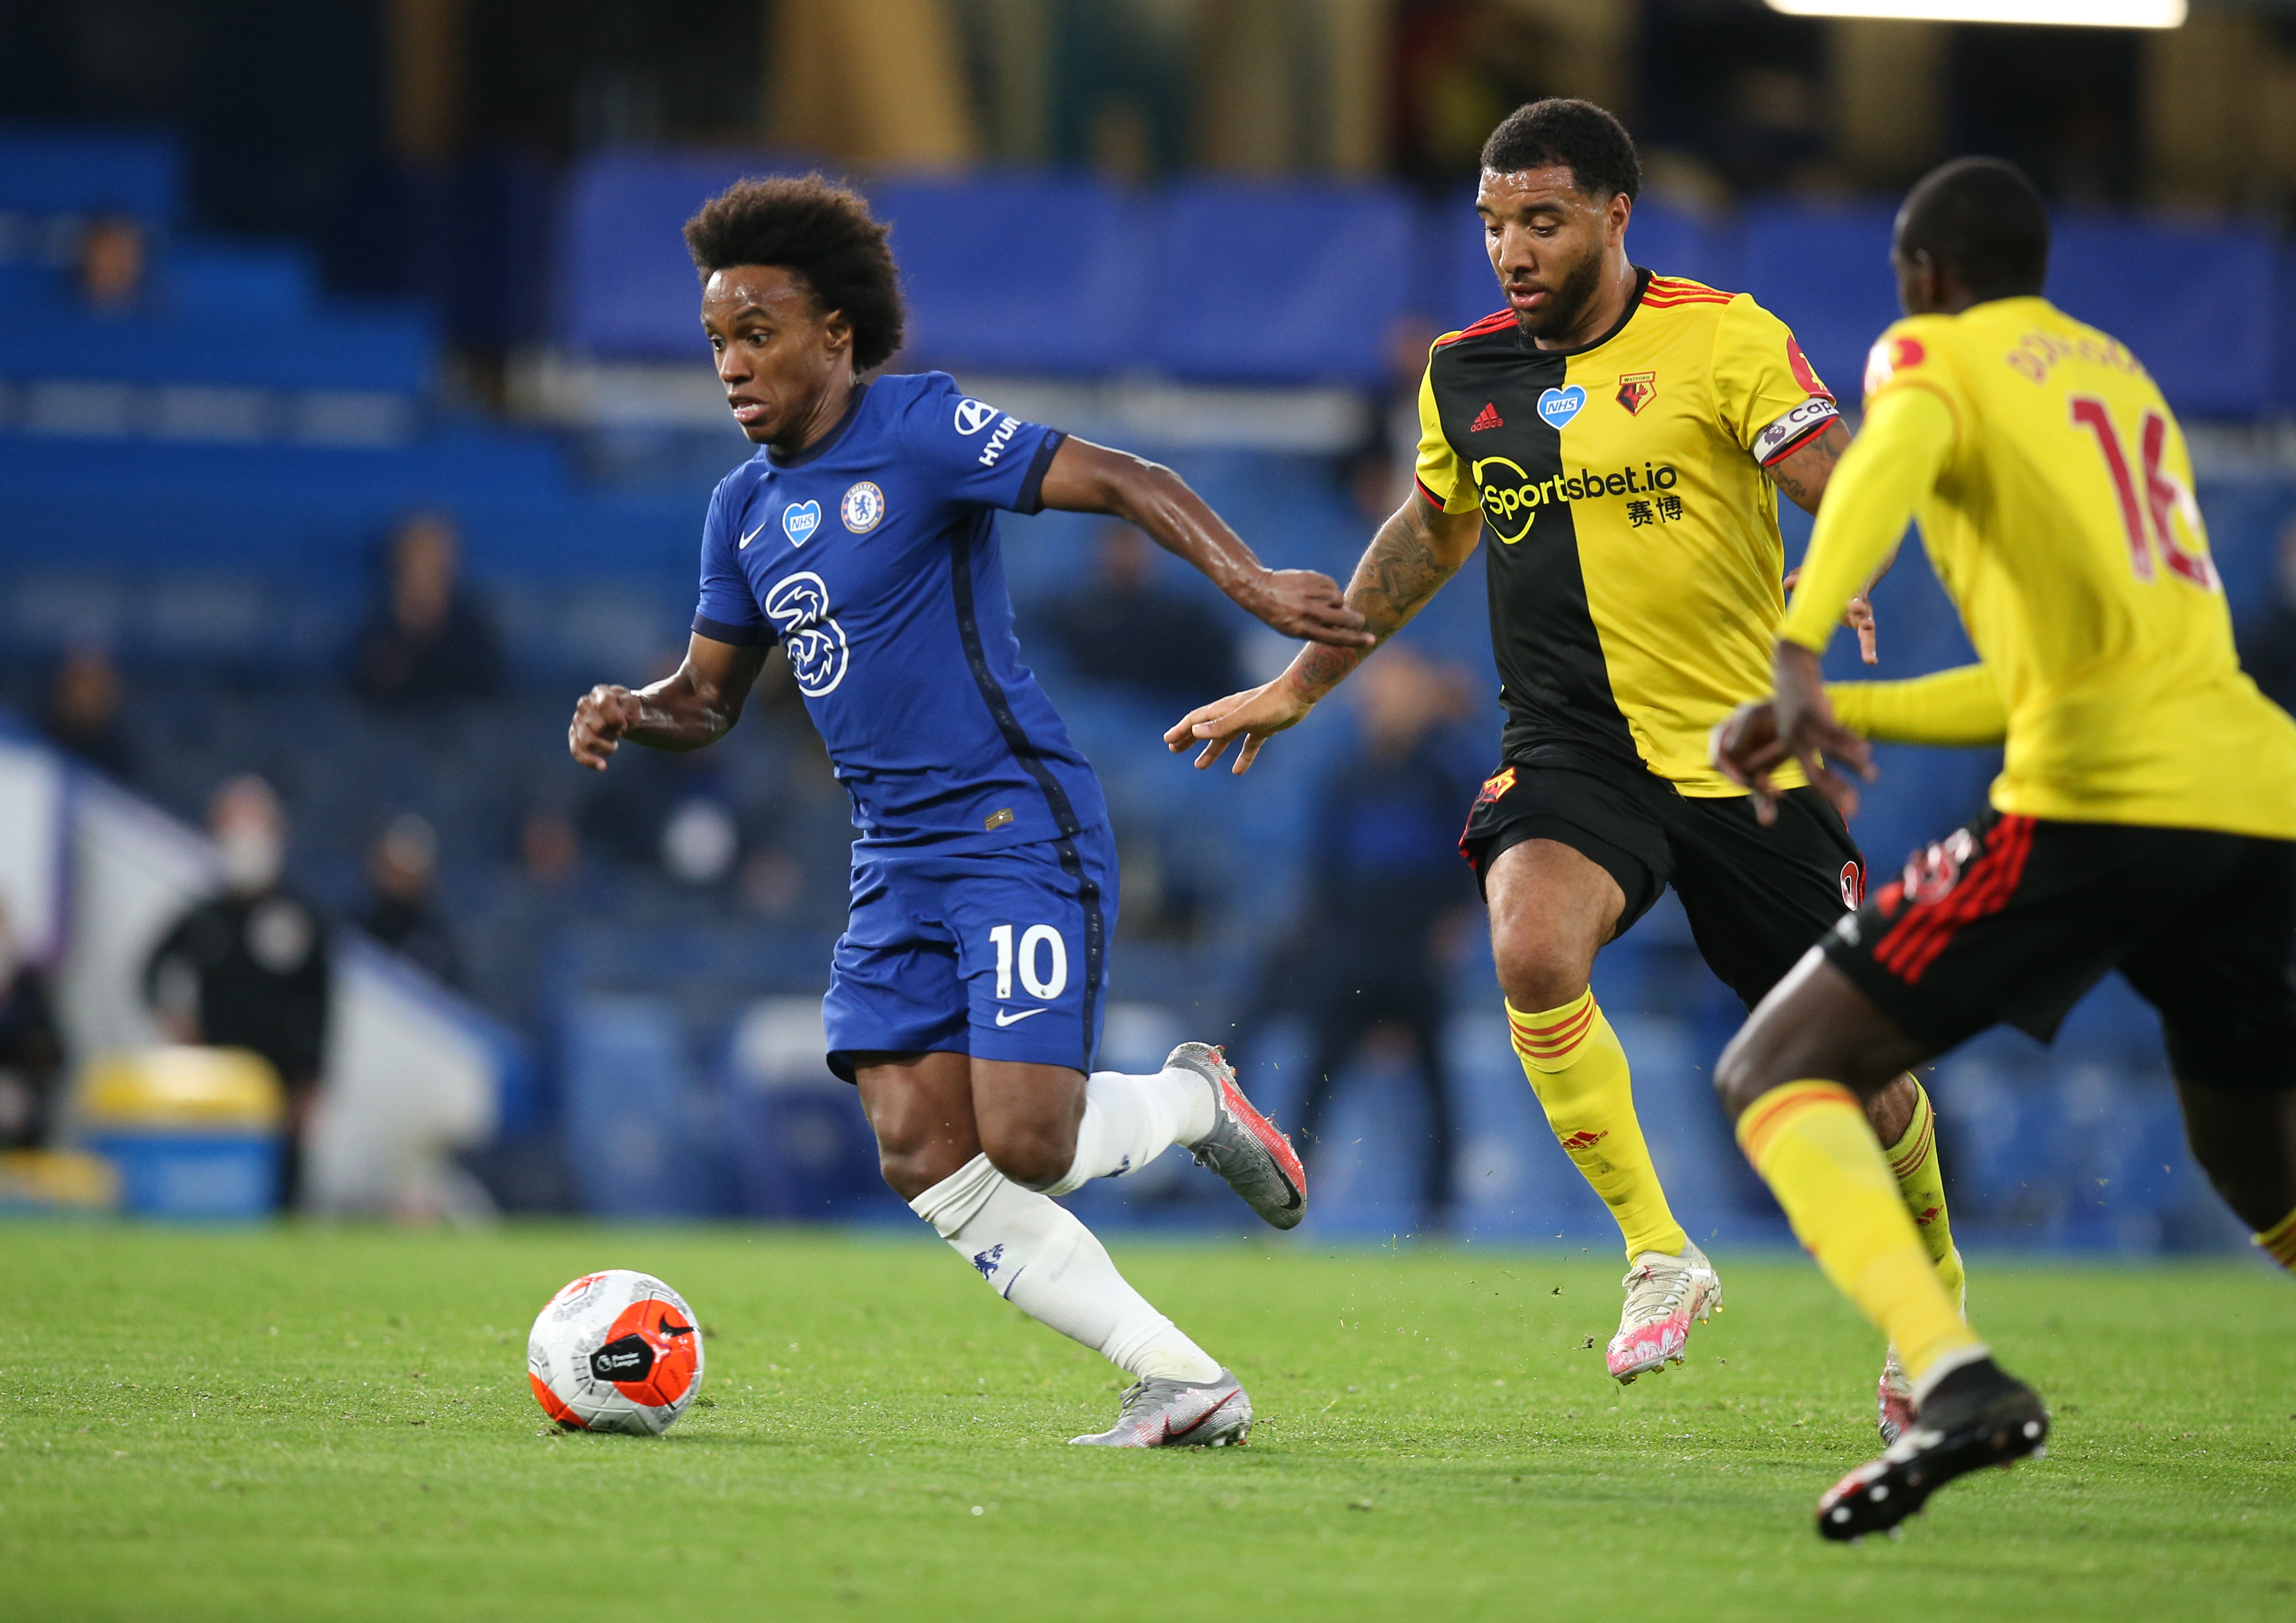 What can Willian bring to Arsenal's attack?